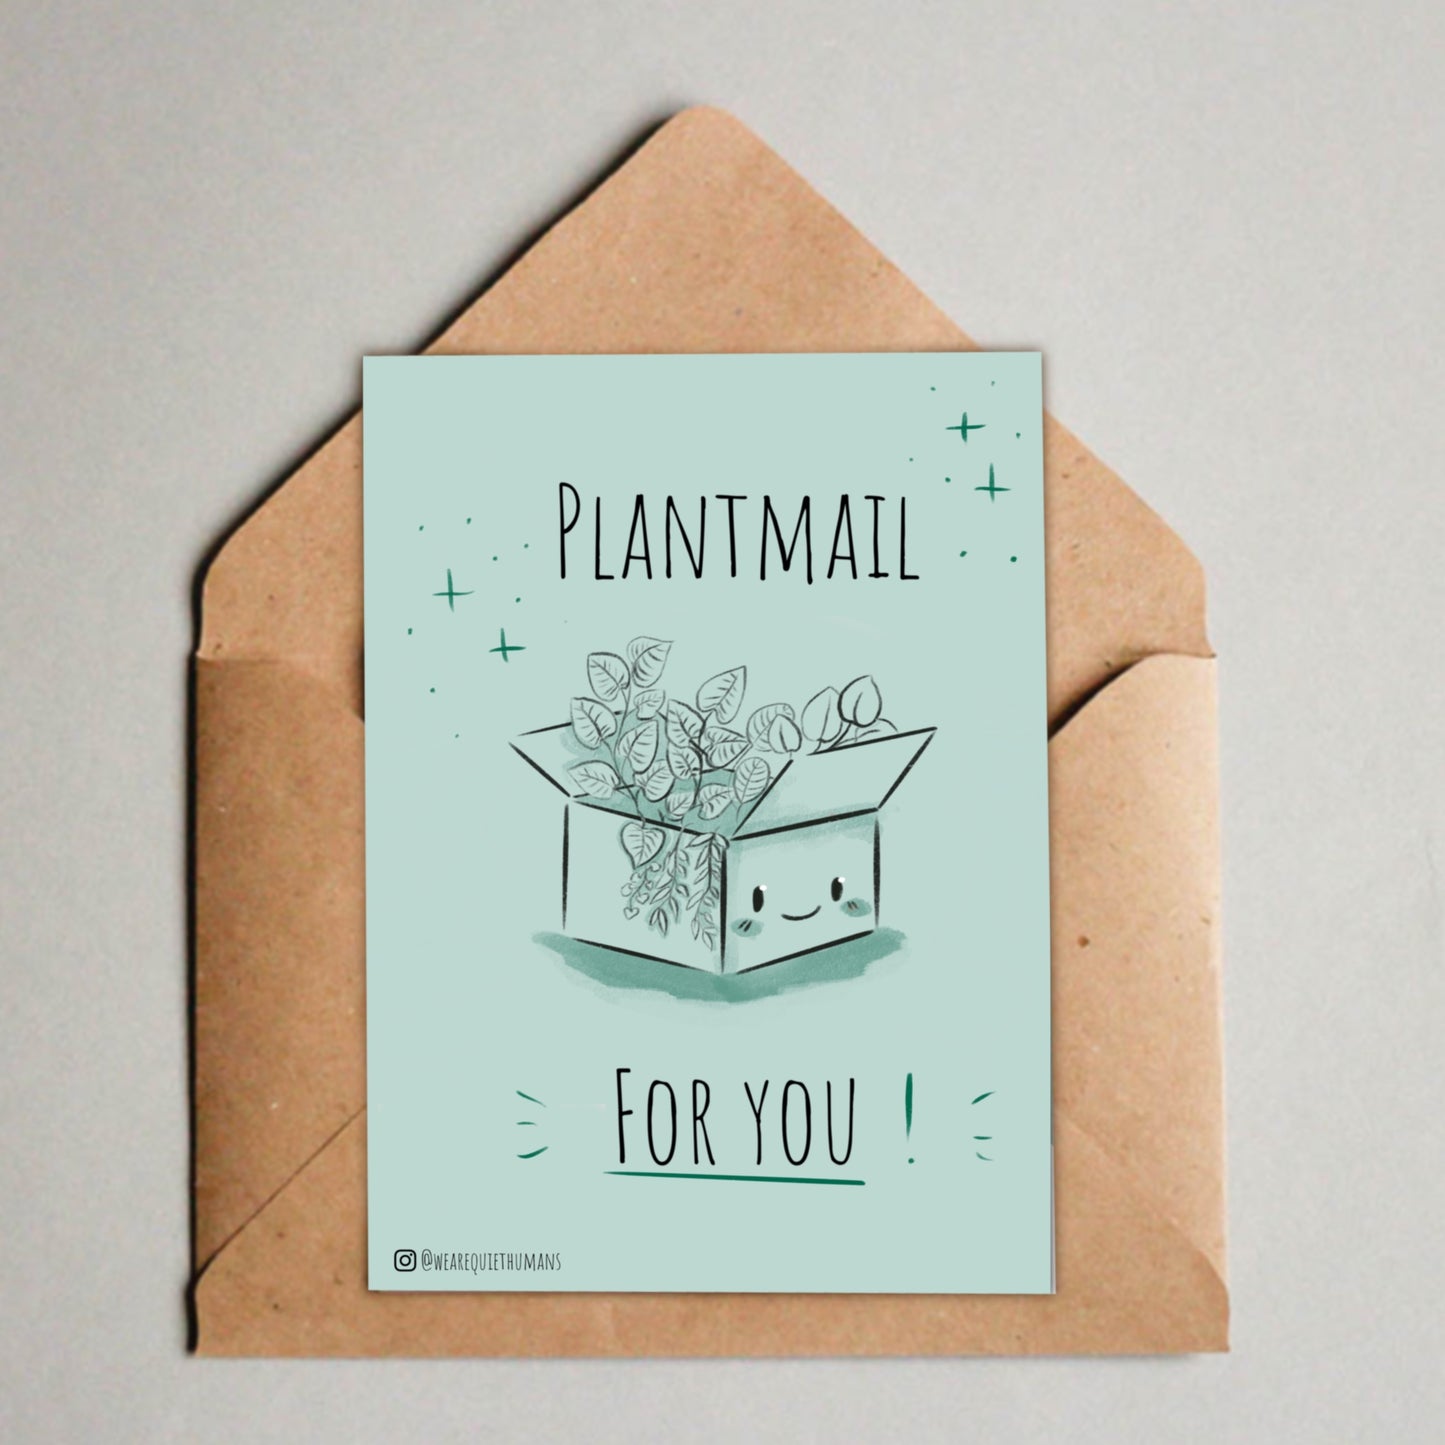 Postkarte / A6 Print -  Plantmail for you - wearequiethumans